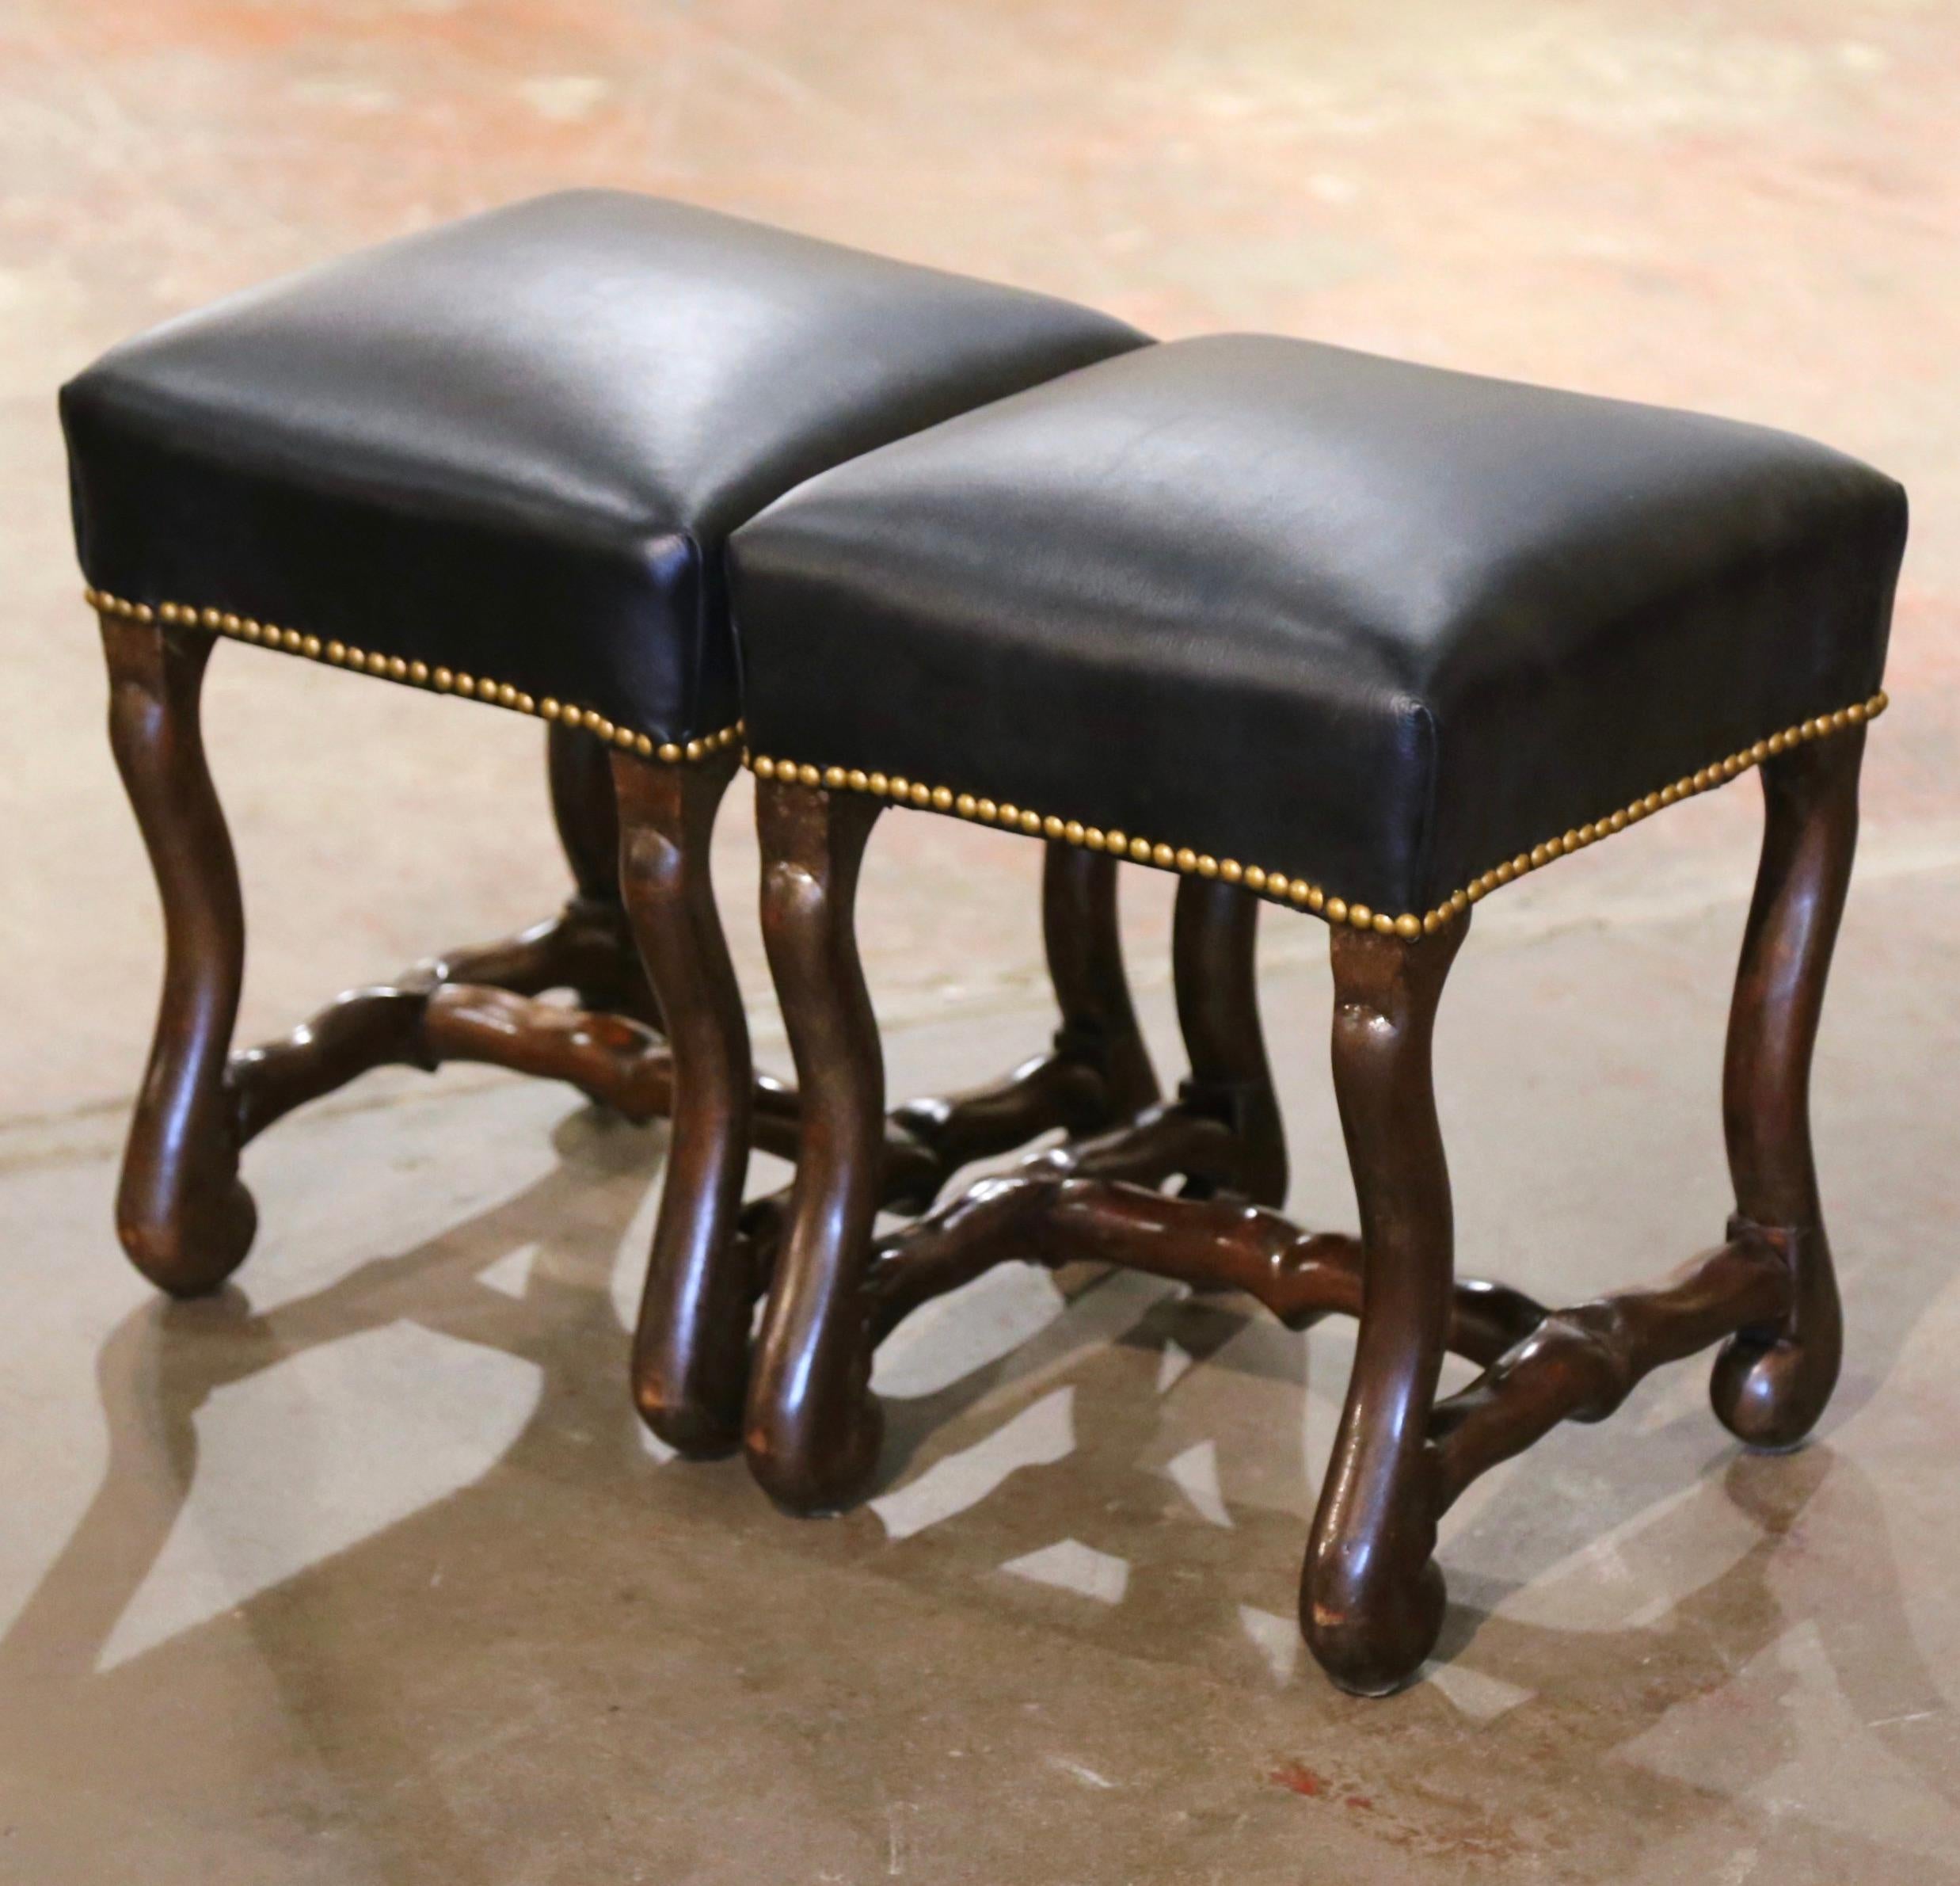 Place these elegant antique stools in a living room or a den for extra seating. Crafted in Southern France circa 1950, and square in shape, each fruitwood stool features hand carved scrolled 